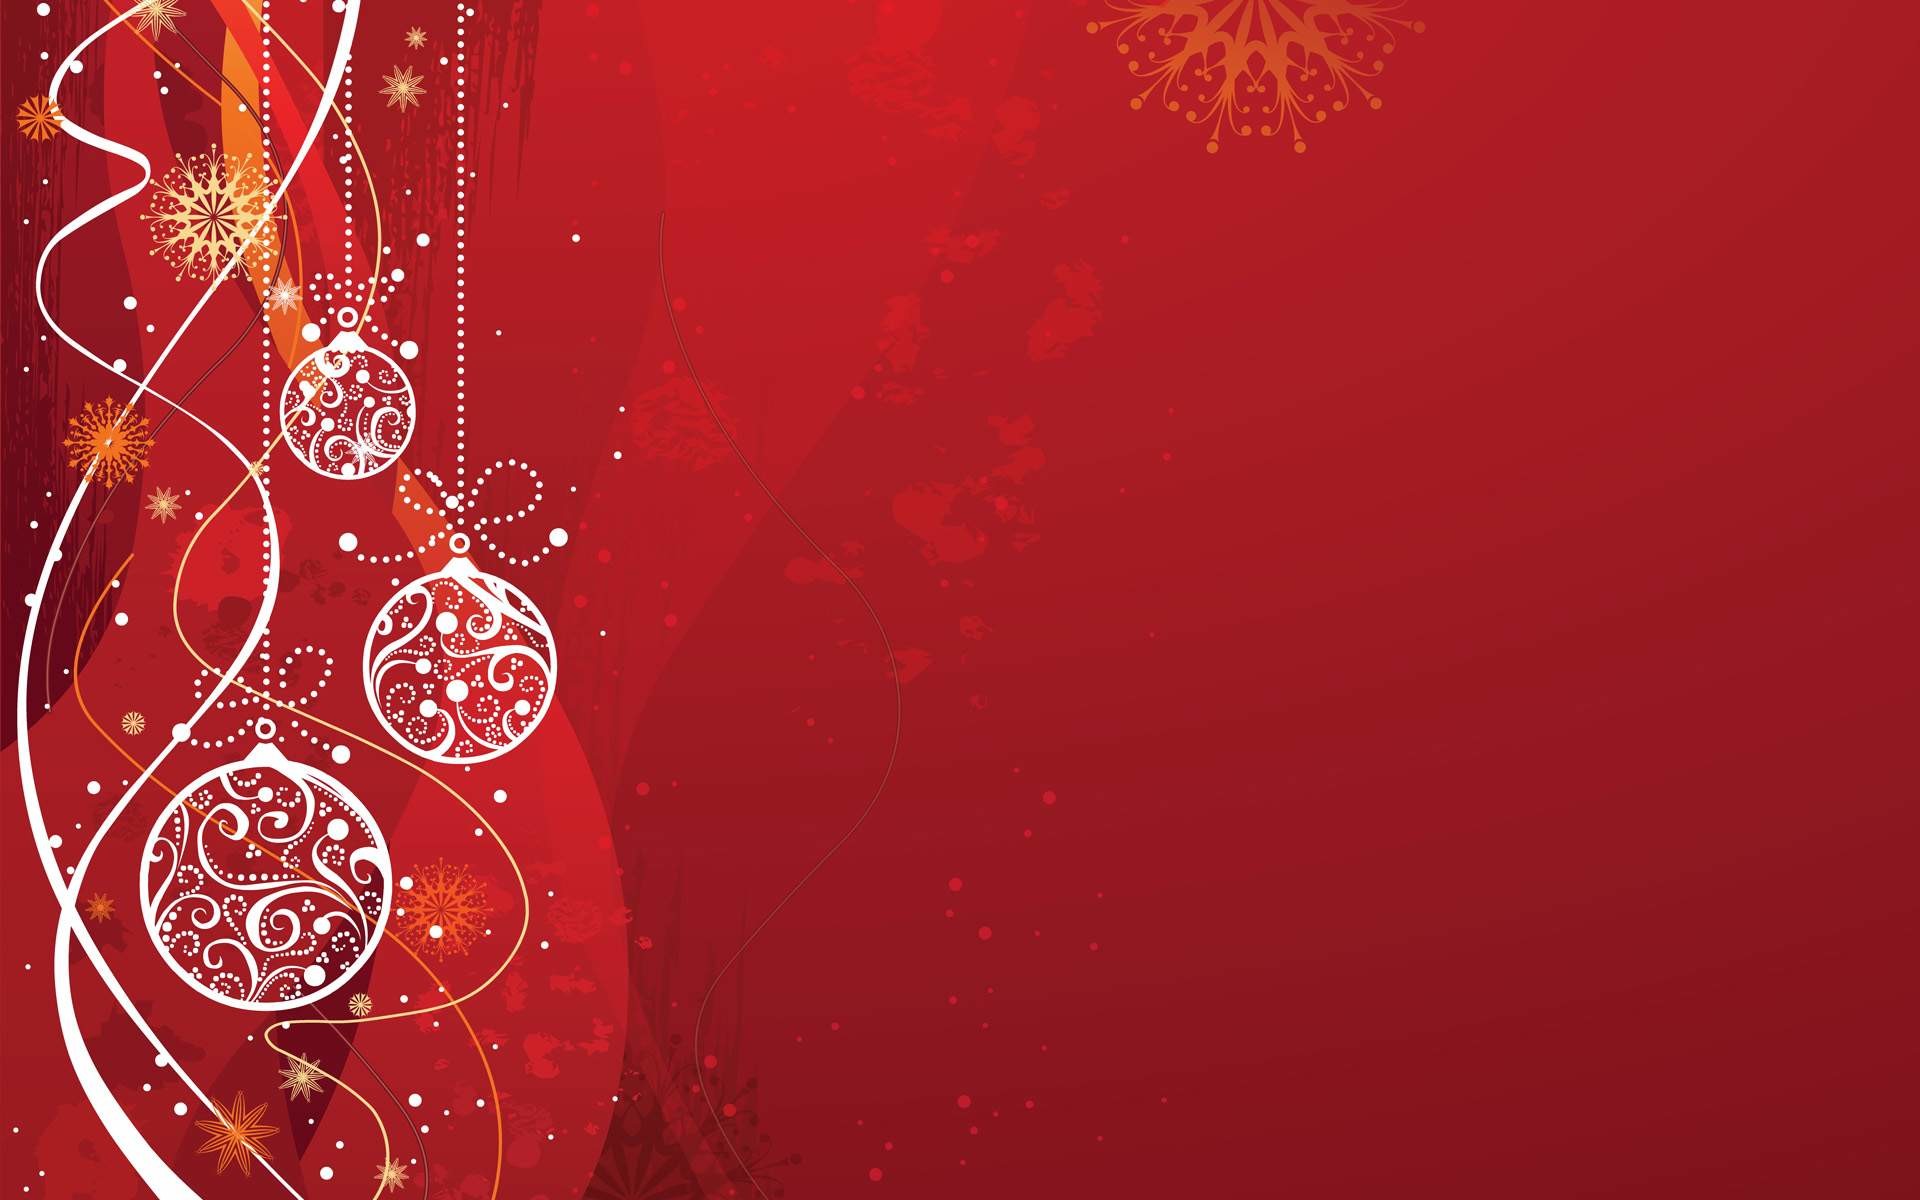 1920x1200 Christmas Background. Blue Eyes with Wallpapers ...